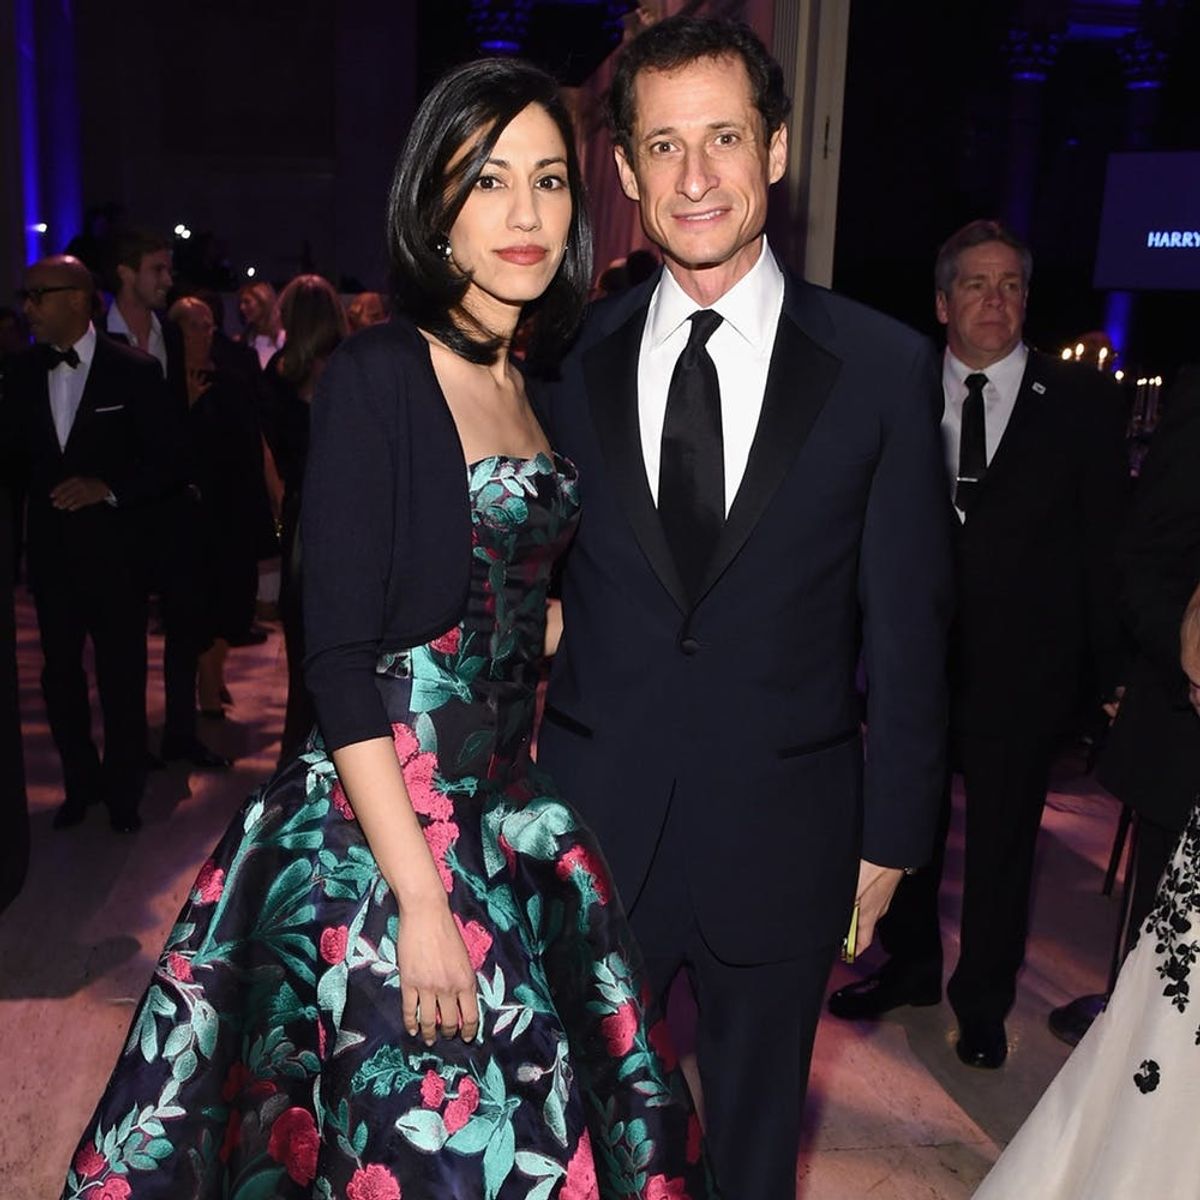 Anthony Weiner’s Latest Scandal Has Resulted in His Wife Getting Mom-Shamed